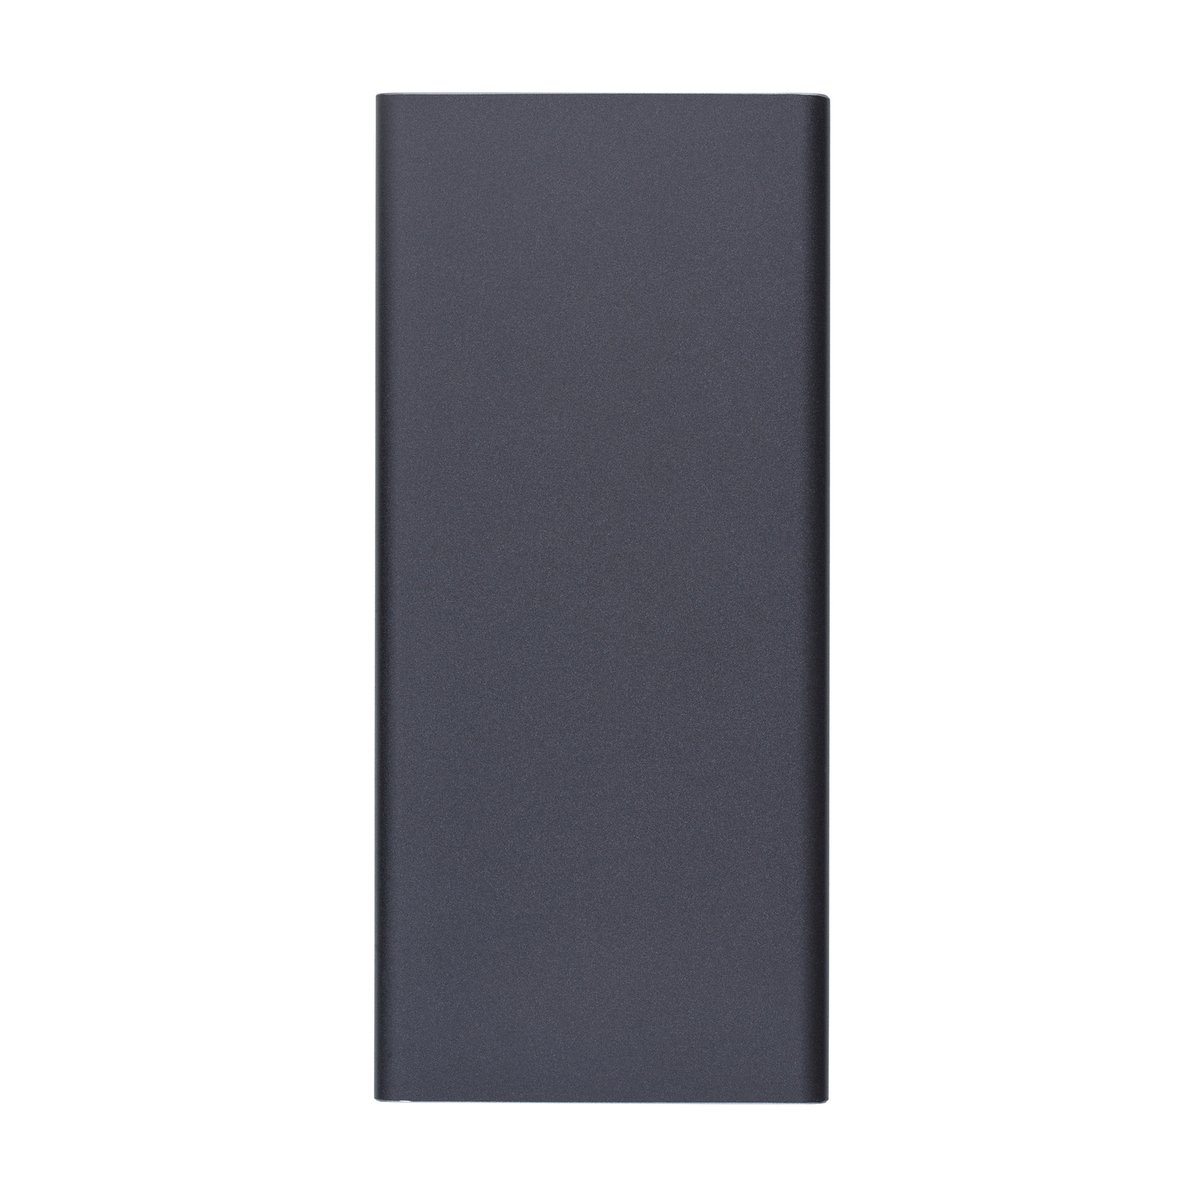 Powerbank with Fast Charge and Power Delivery REEVES-FENSMARK dark grey 10000 mAh